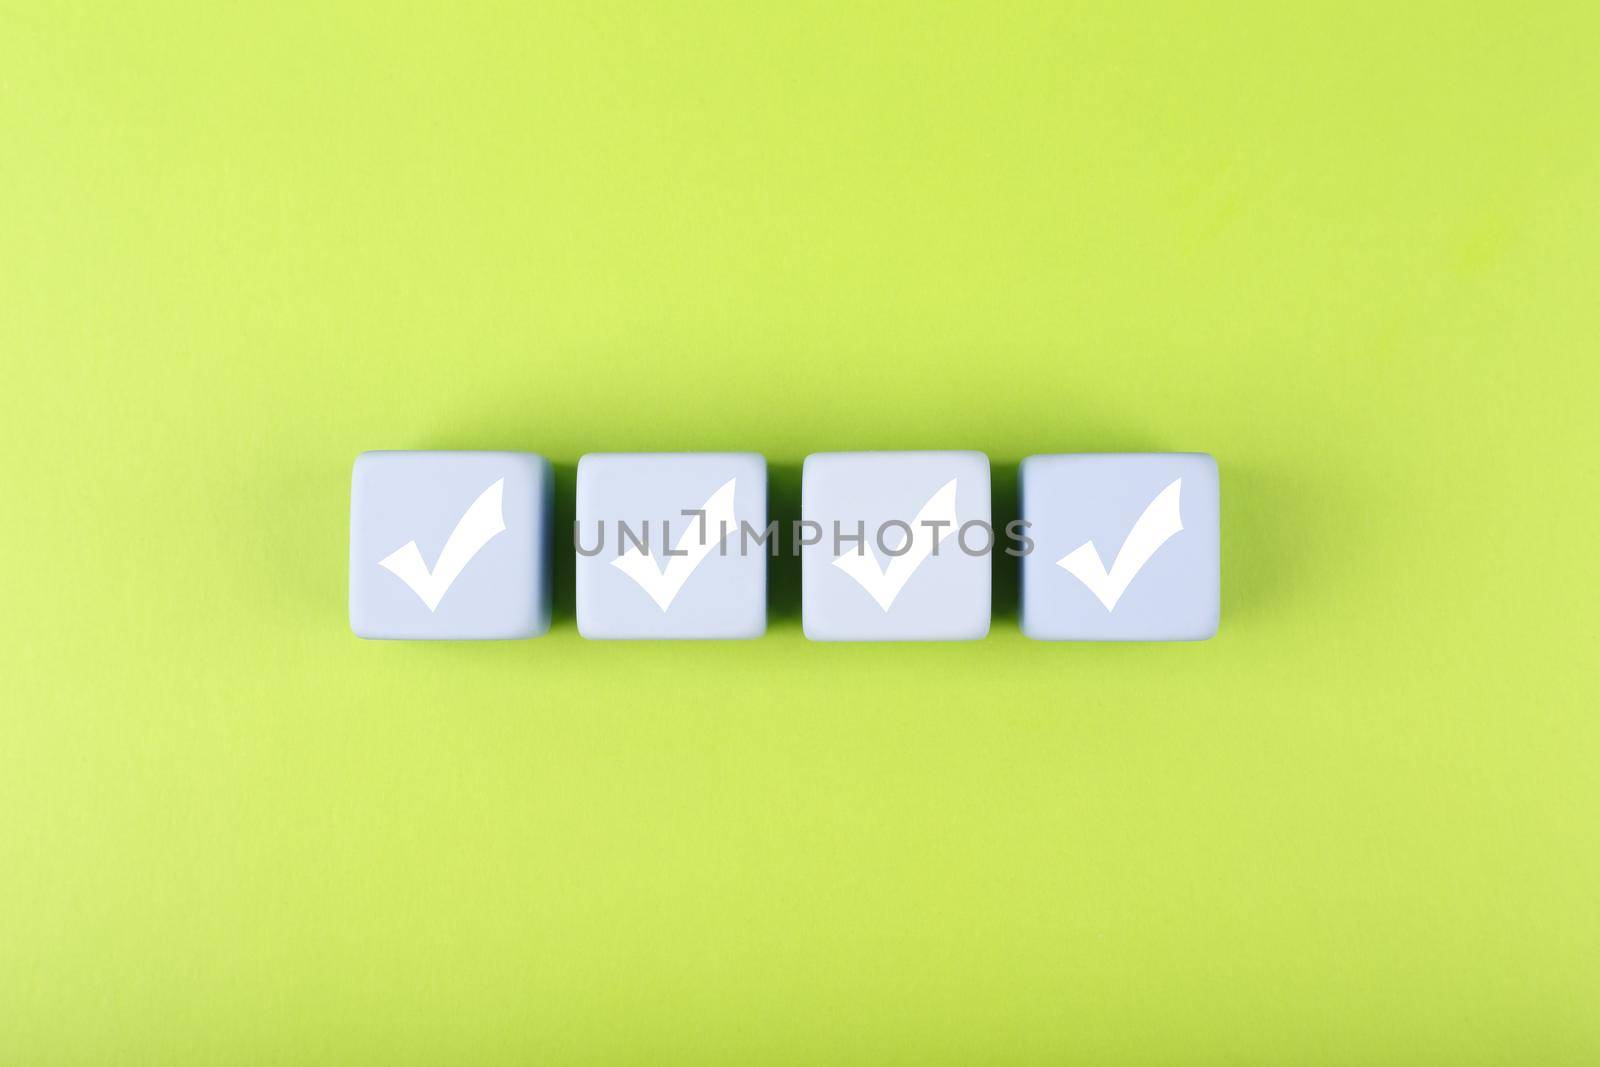 Four checkmarks on white cubes against bright green background. Concept of questionary, checklist, to do list, planning, business or verification. Creative minimal composition